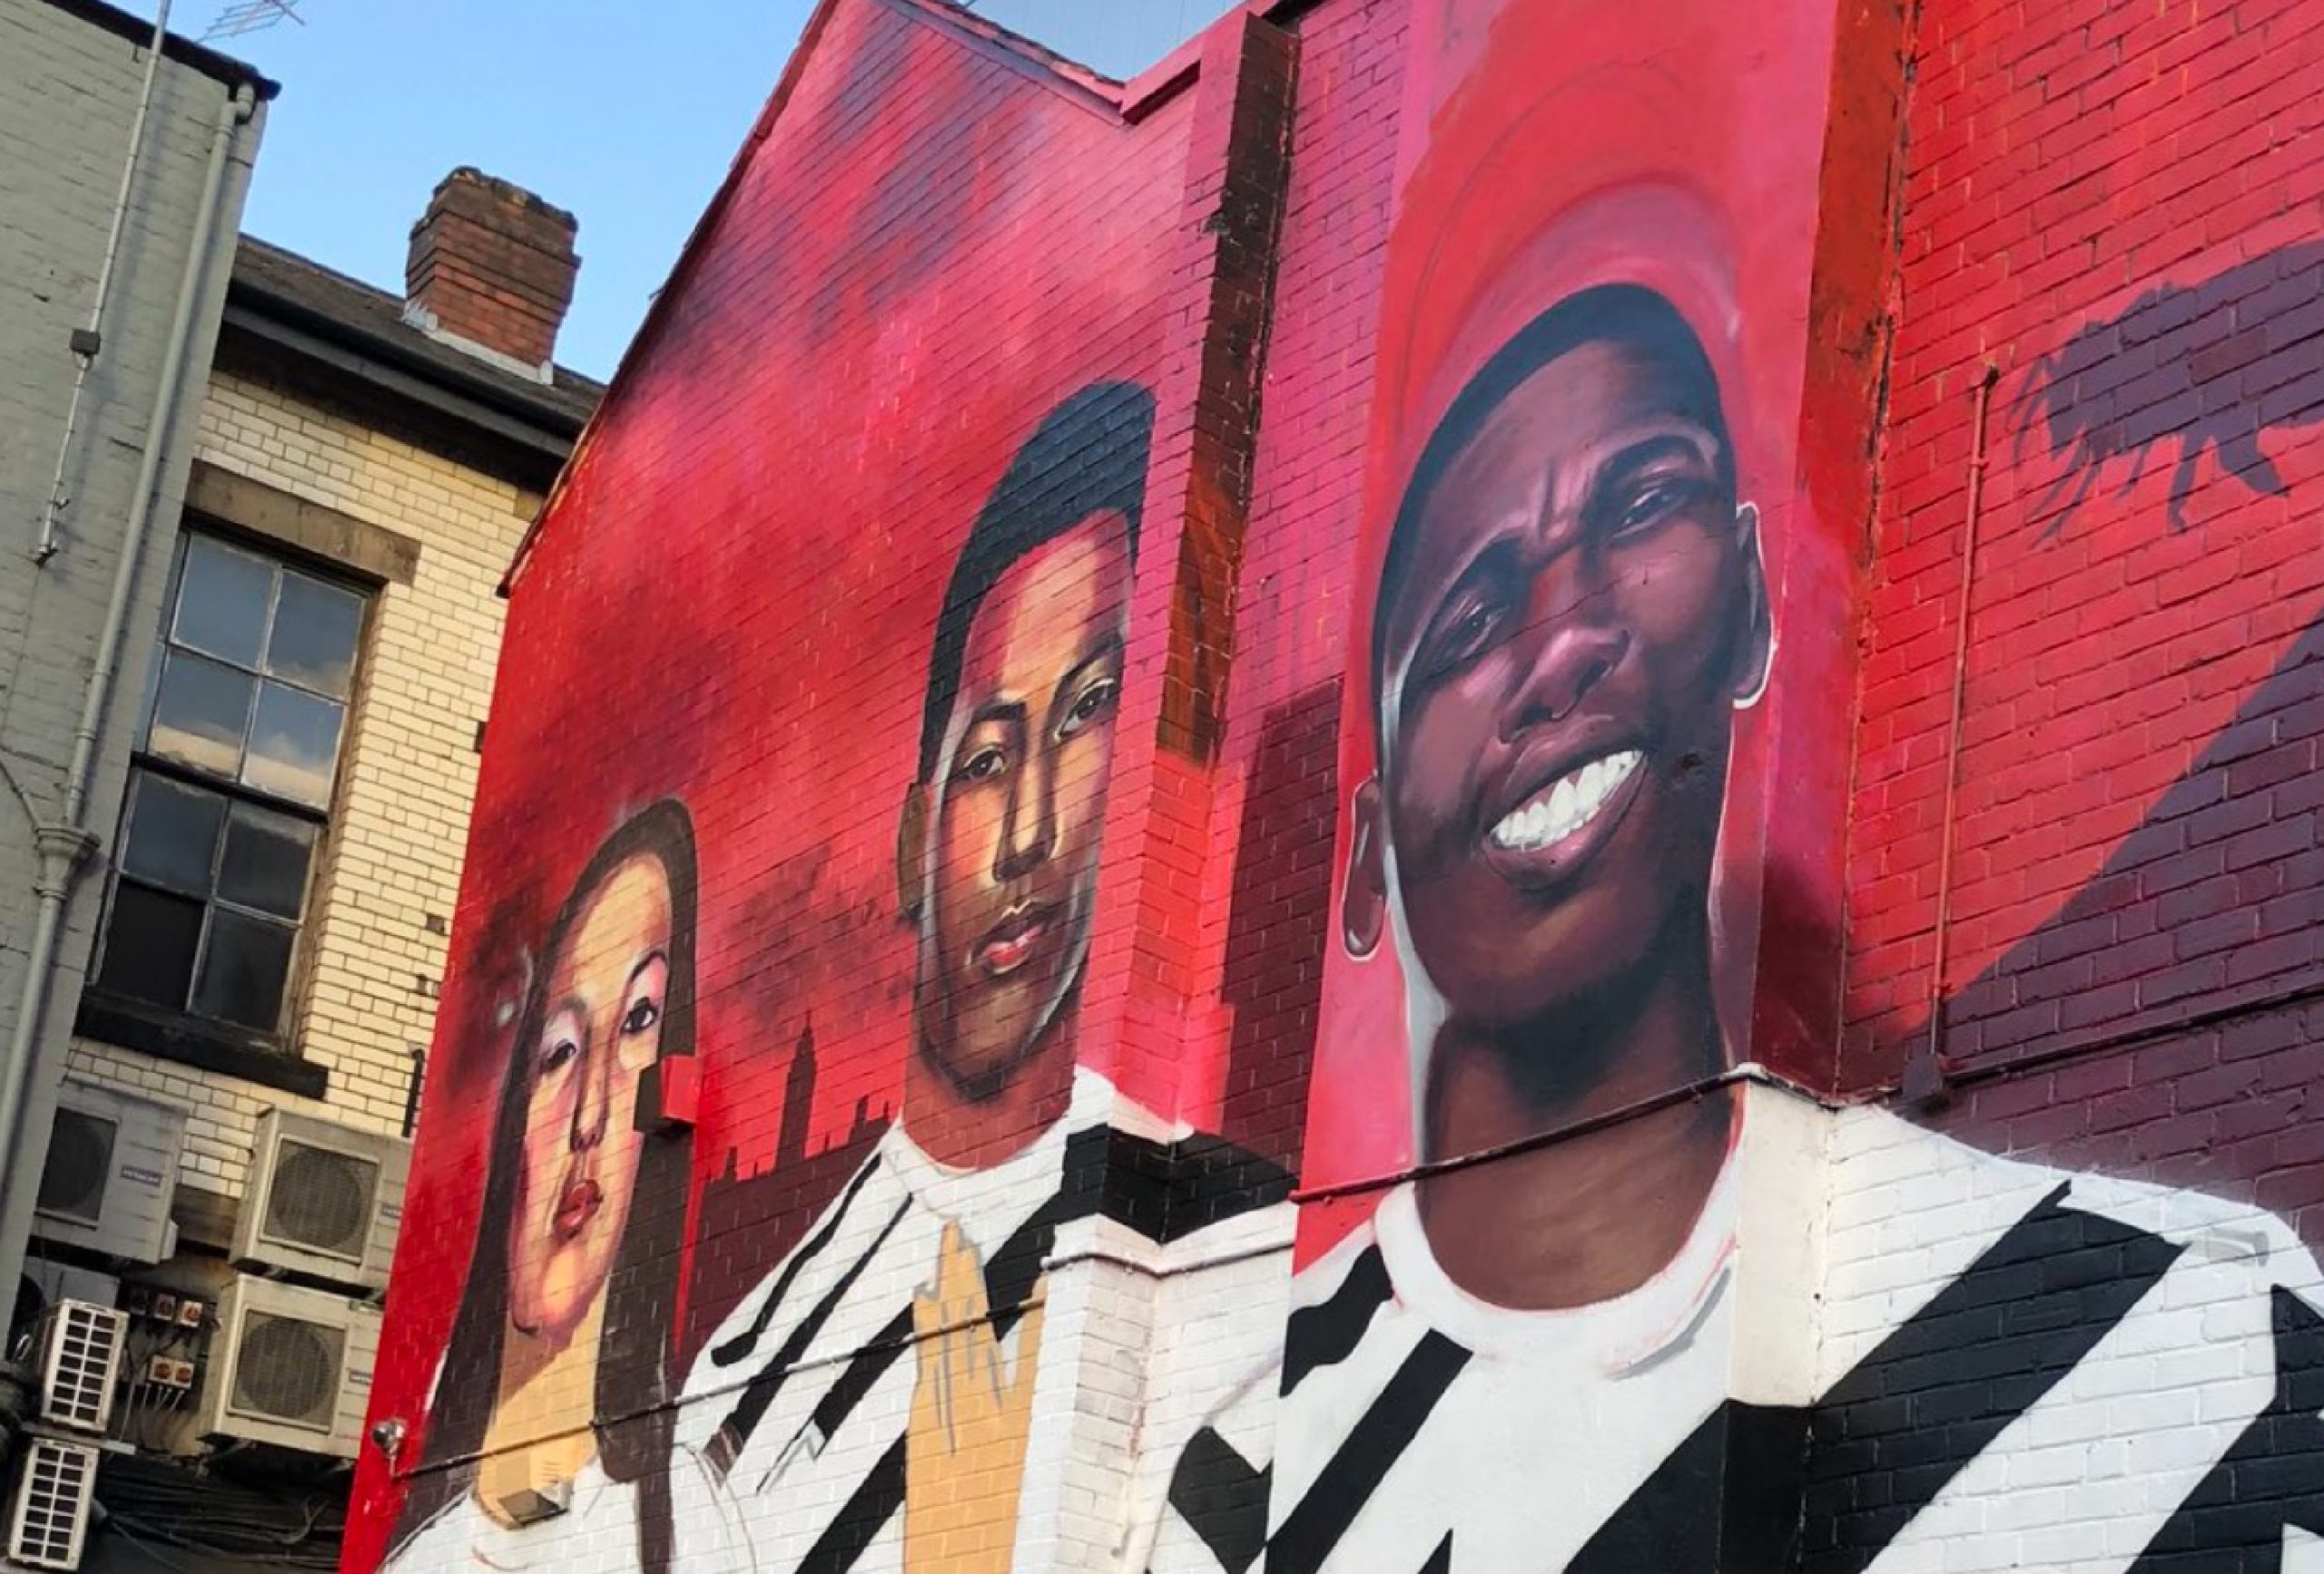 A god-awful mural of Marcus Rashford and Paul Pogba has been put up in Manchester